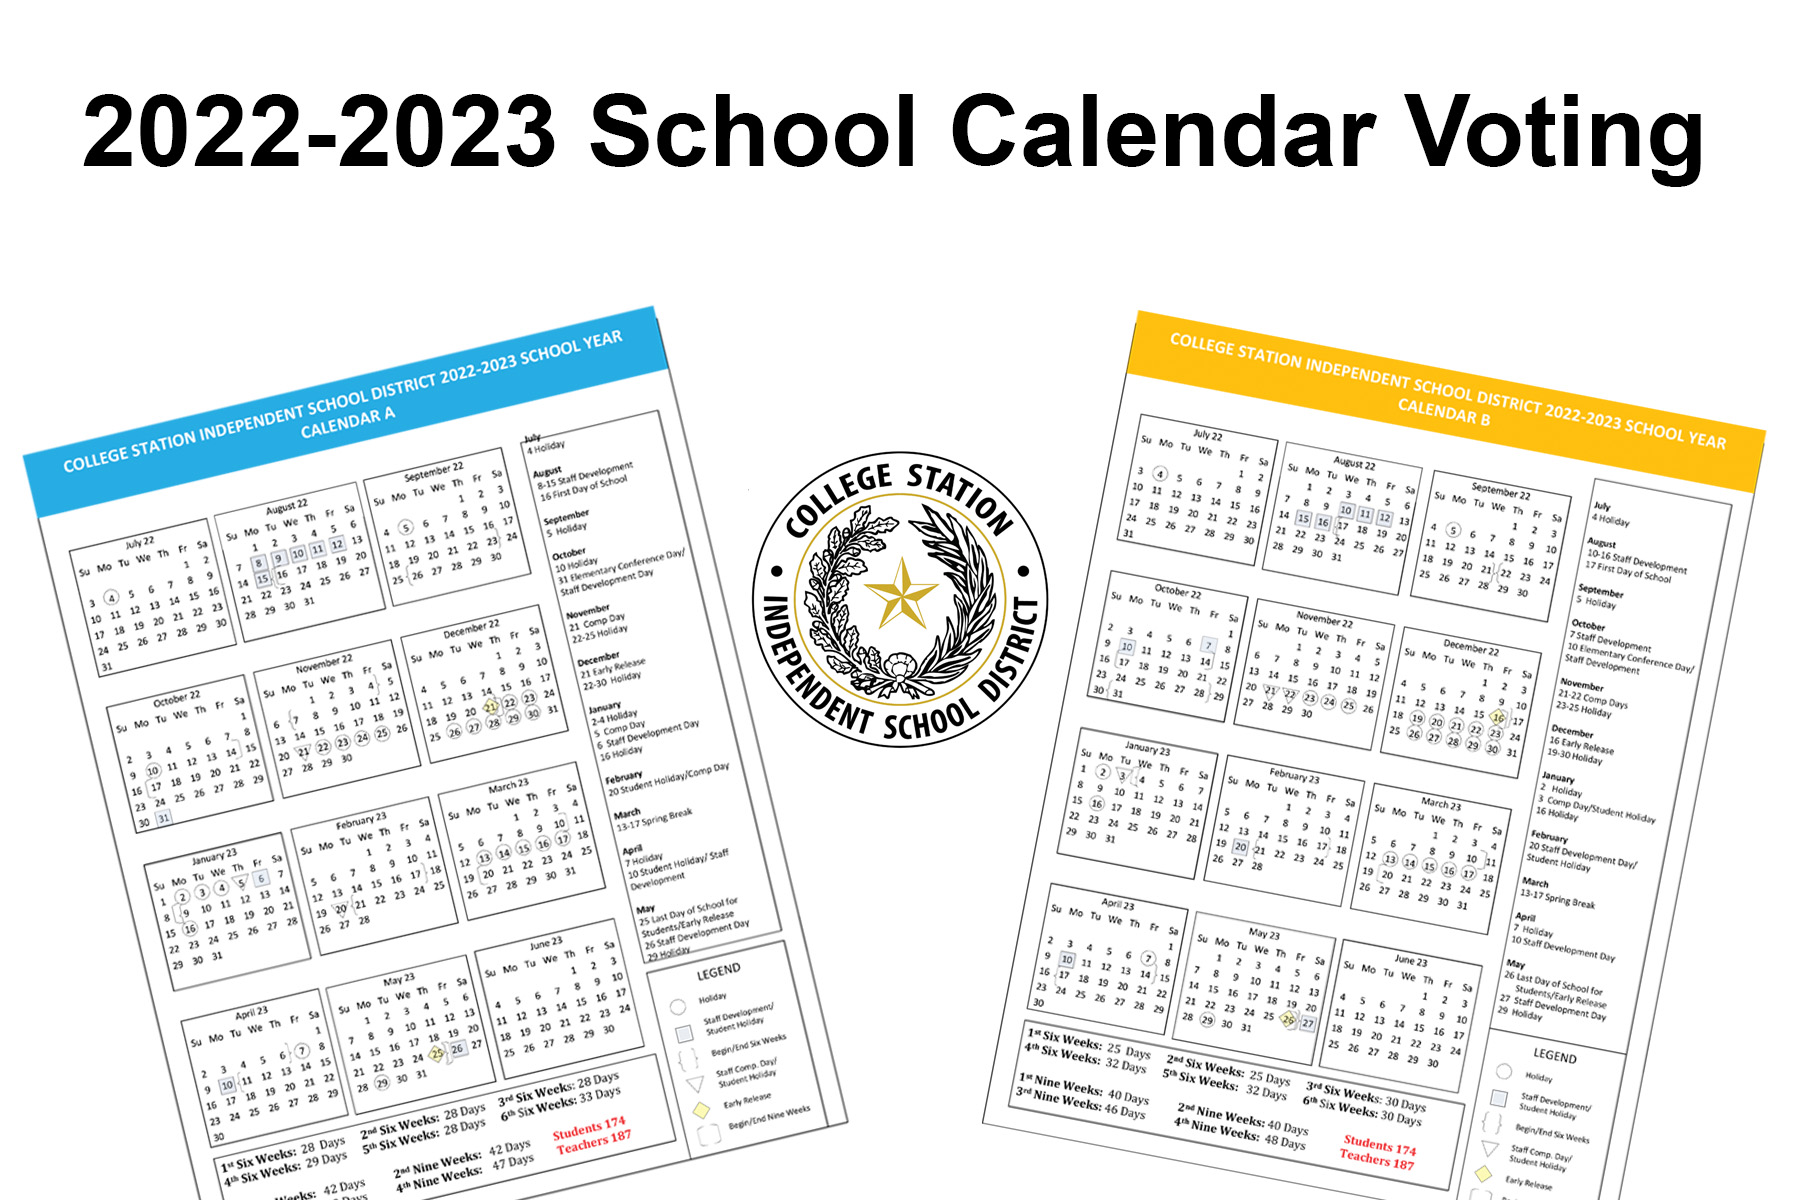 College Station Isd Calendar 2022 2023 College Station Isd On Twitter: "It's Calendar Voting Time. Please Take A  Few Minutes To Review The Two Options For The 2022-2023 Csisd School  Calendar. After Review, Pick Your Favorite And Provide